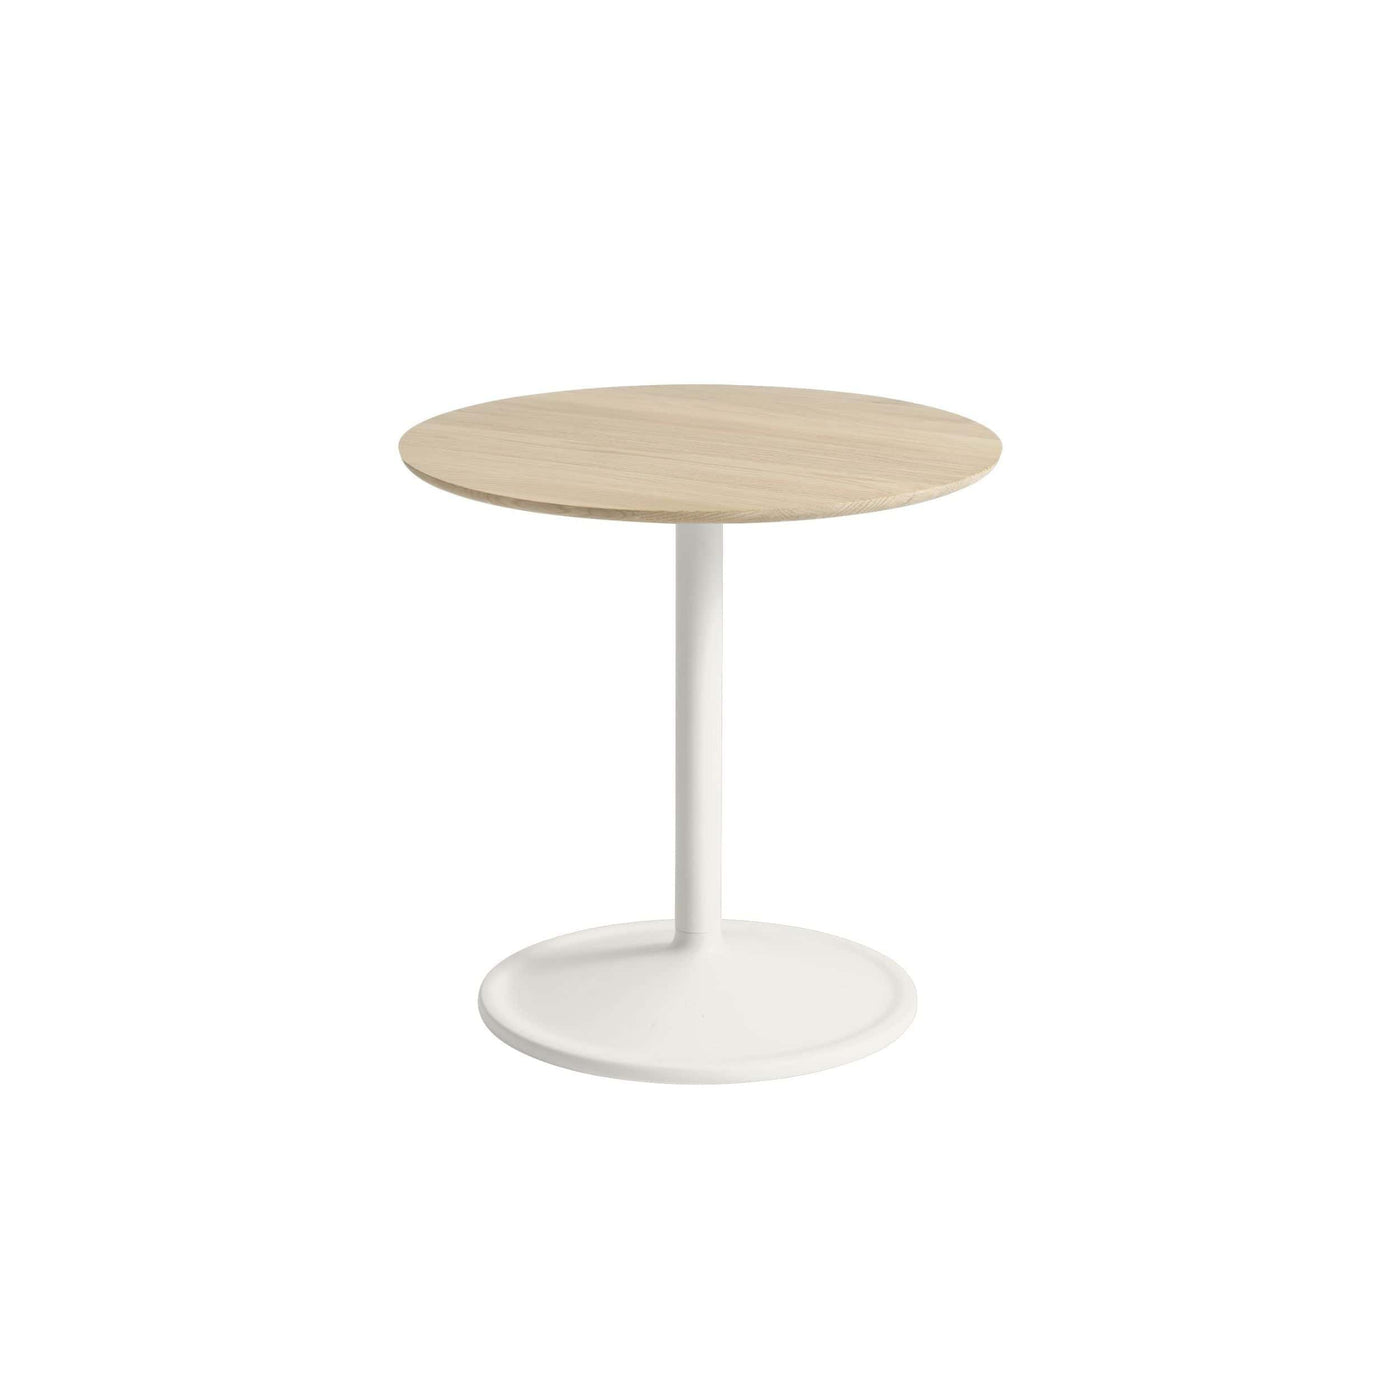 Muuto Soft side table Ø48 x 48cm high. Shop online at someday designs. #colour_solid-oak-white